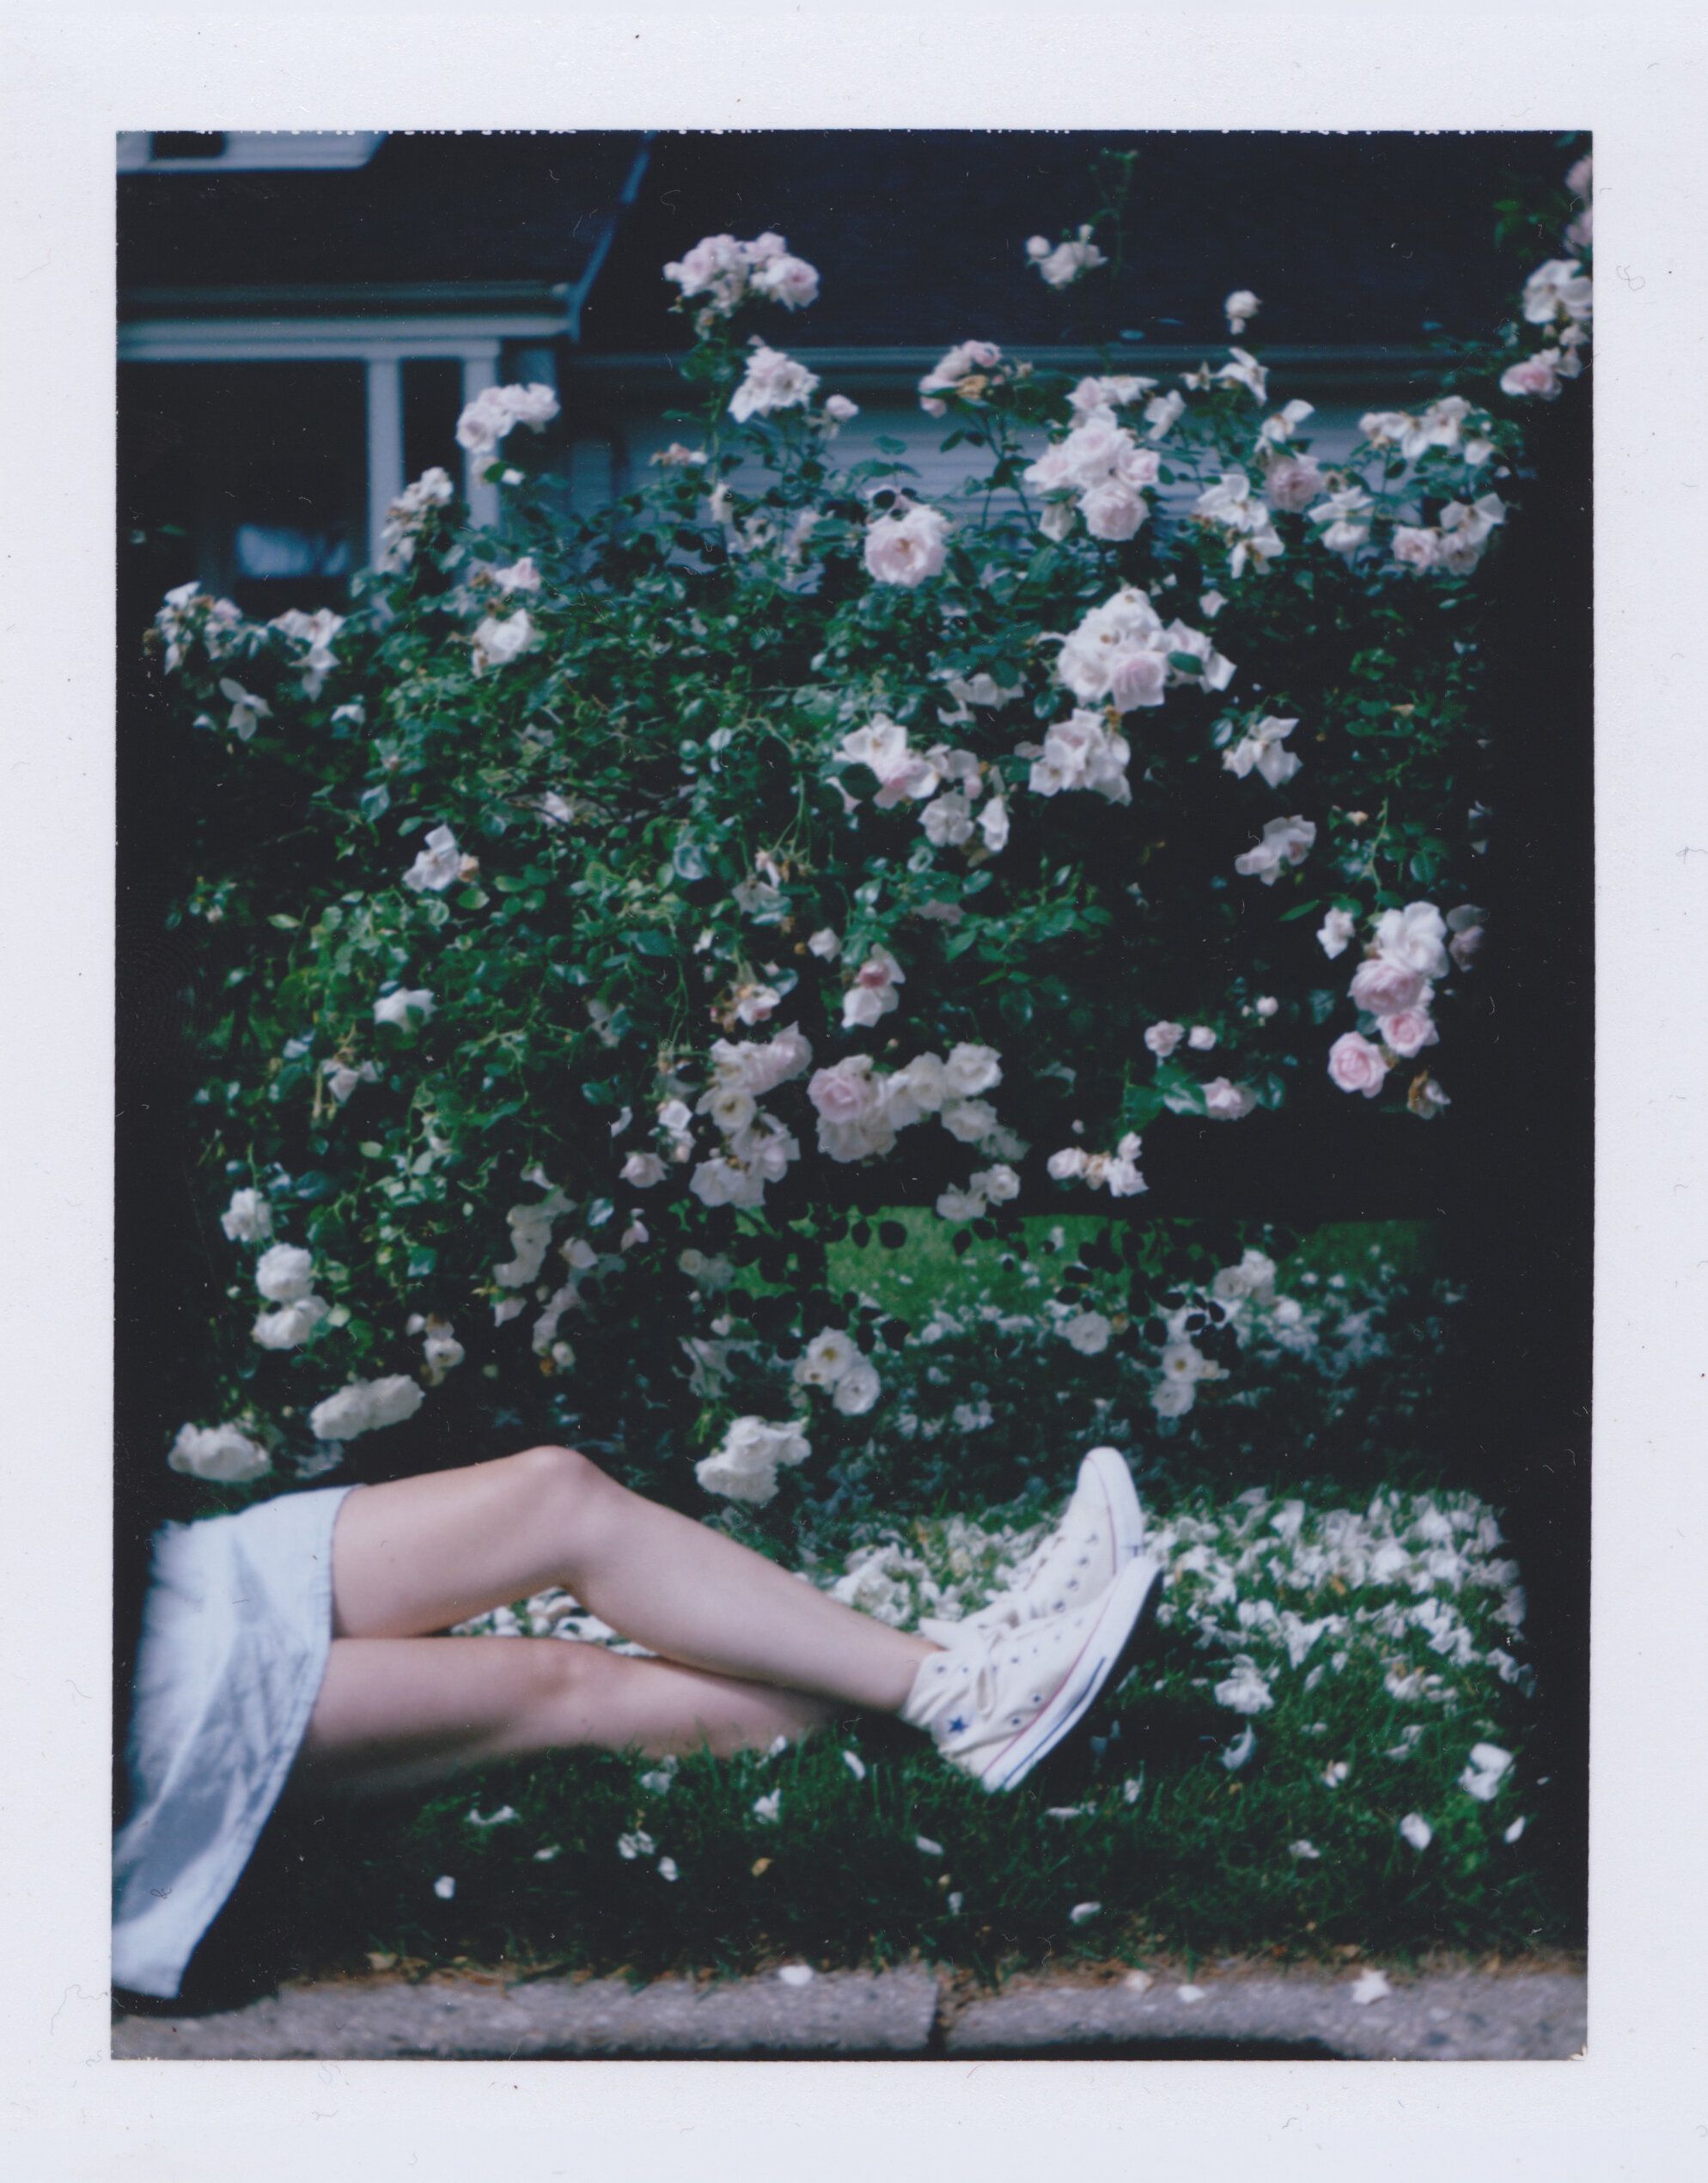 A polaroid of a person's legs in front of a bush with flowers. - Polaroid